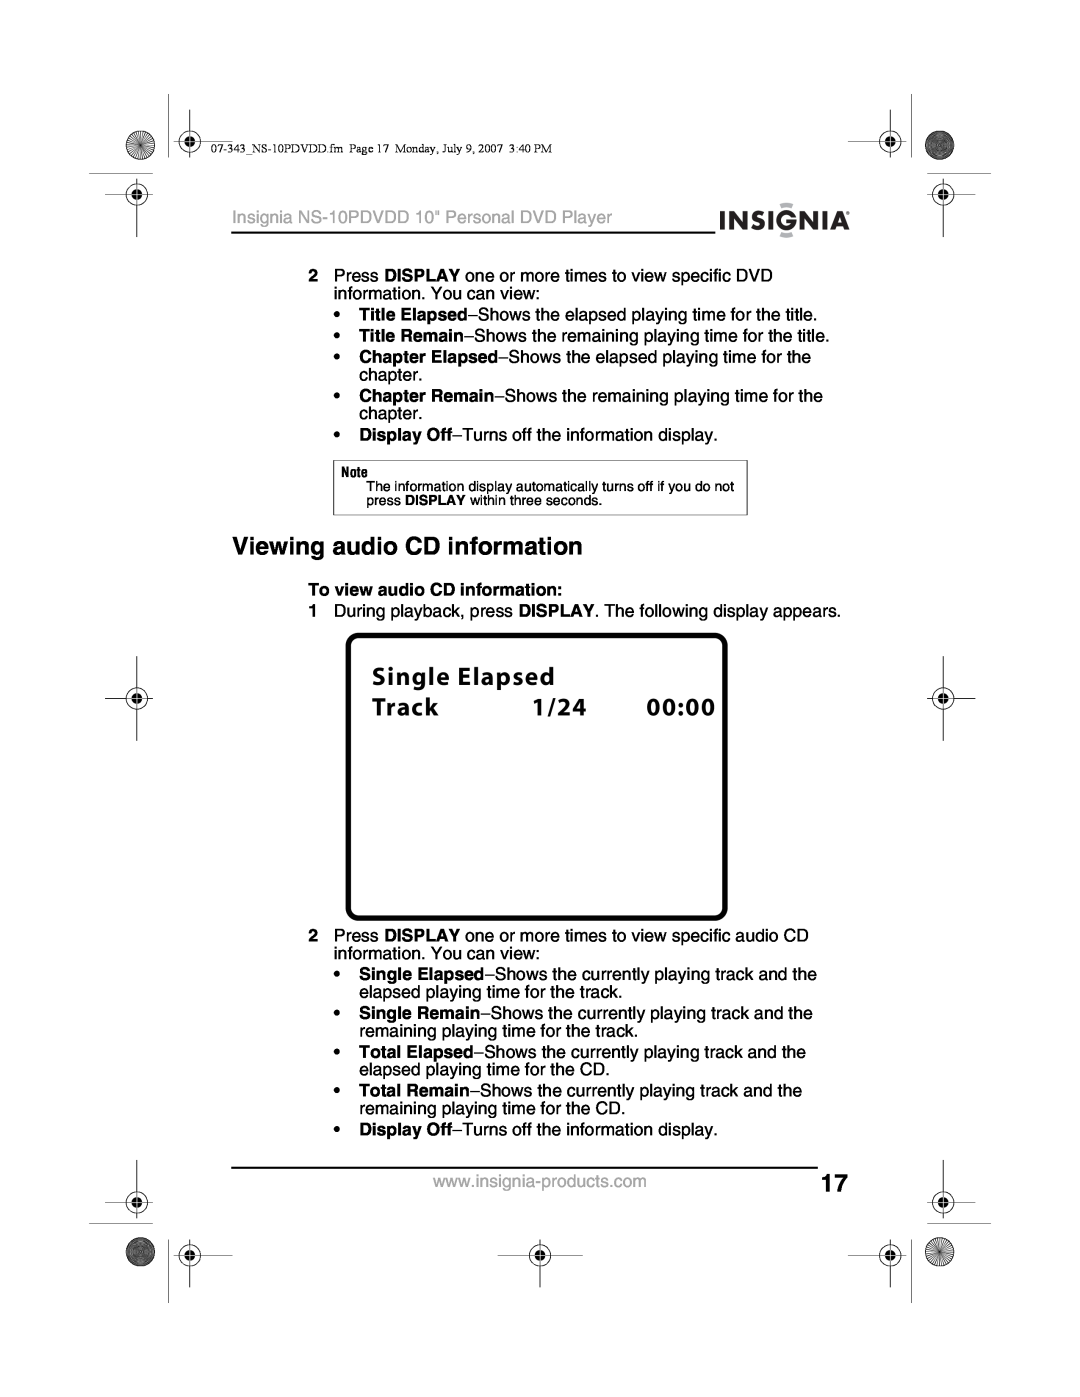 Insignia NS-10PDVDD manual Viewing audio CD information, Single Elapsed Track 1/24, To view audio CD information 